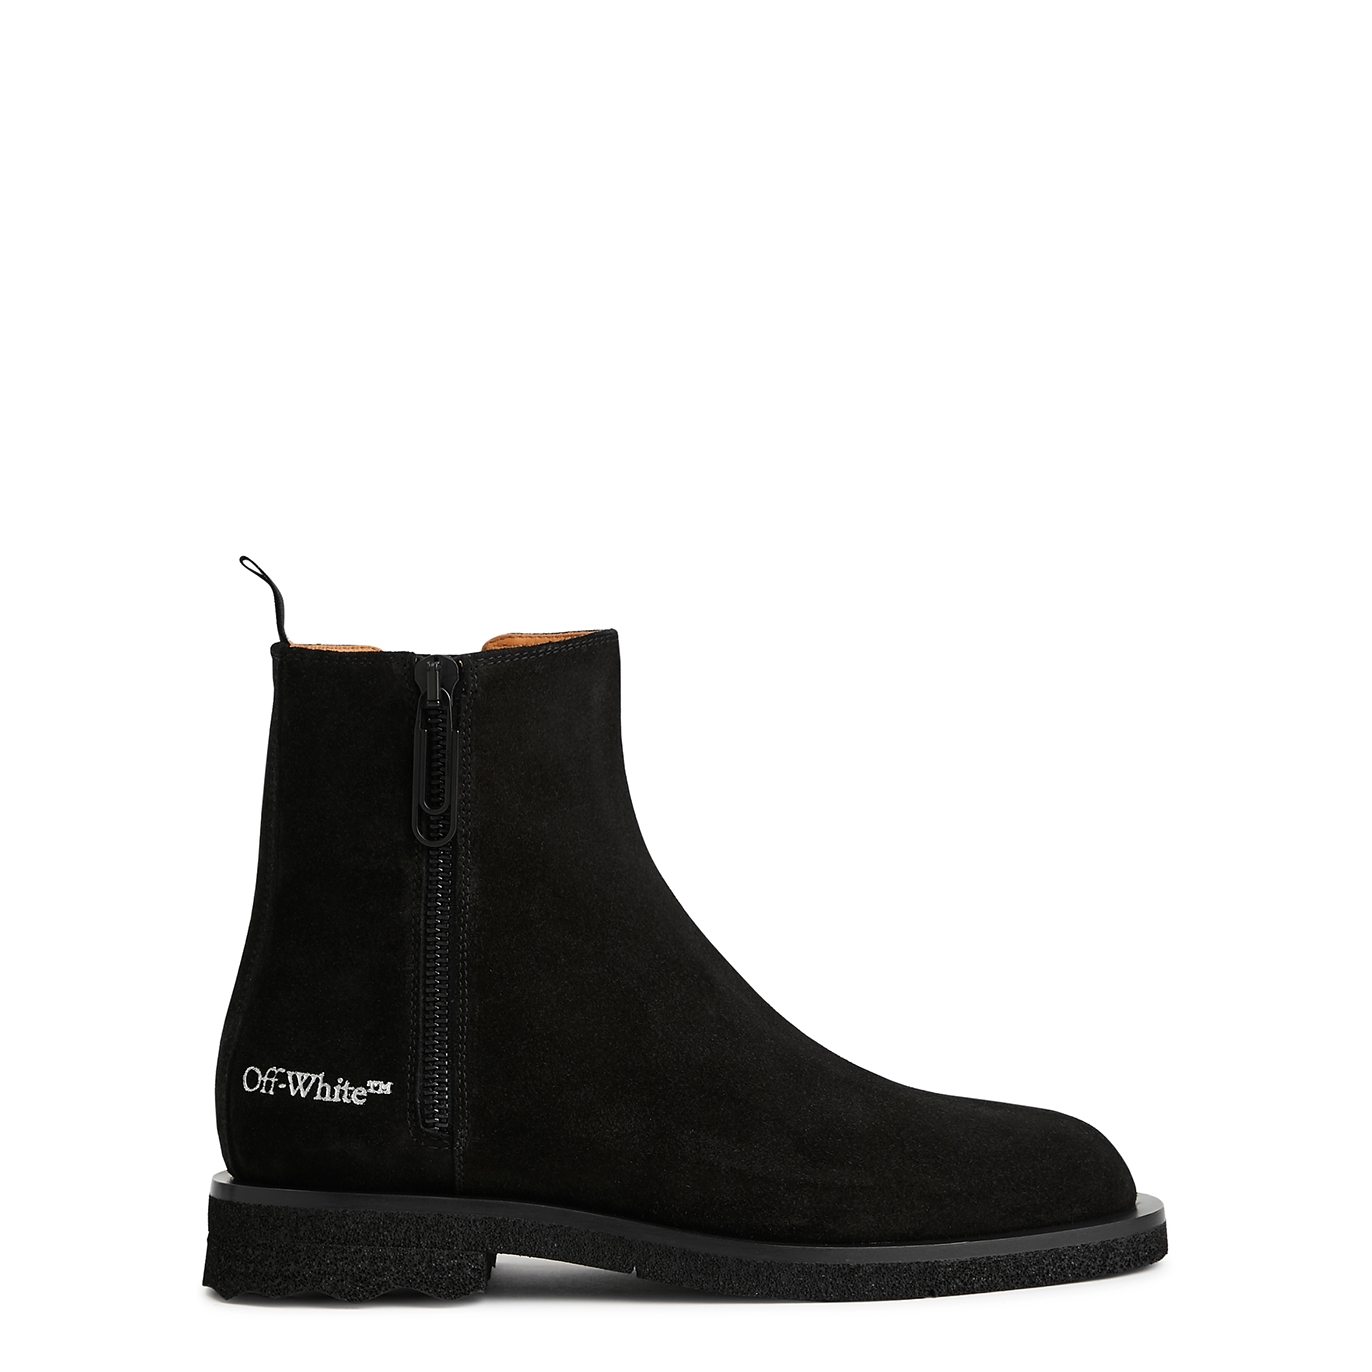 Off-White Suede Ankle Boots - Black - 10